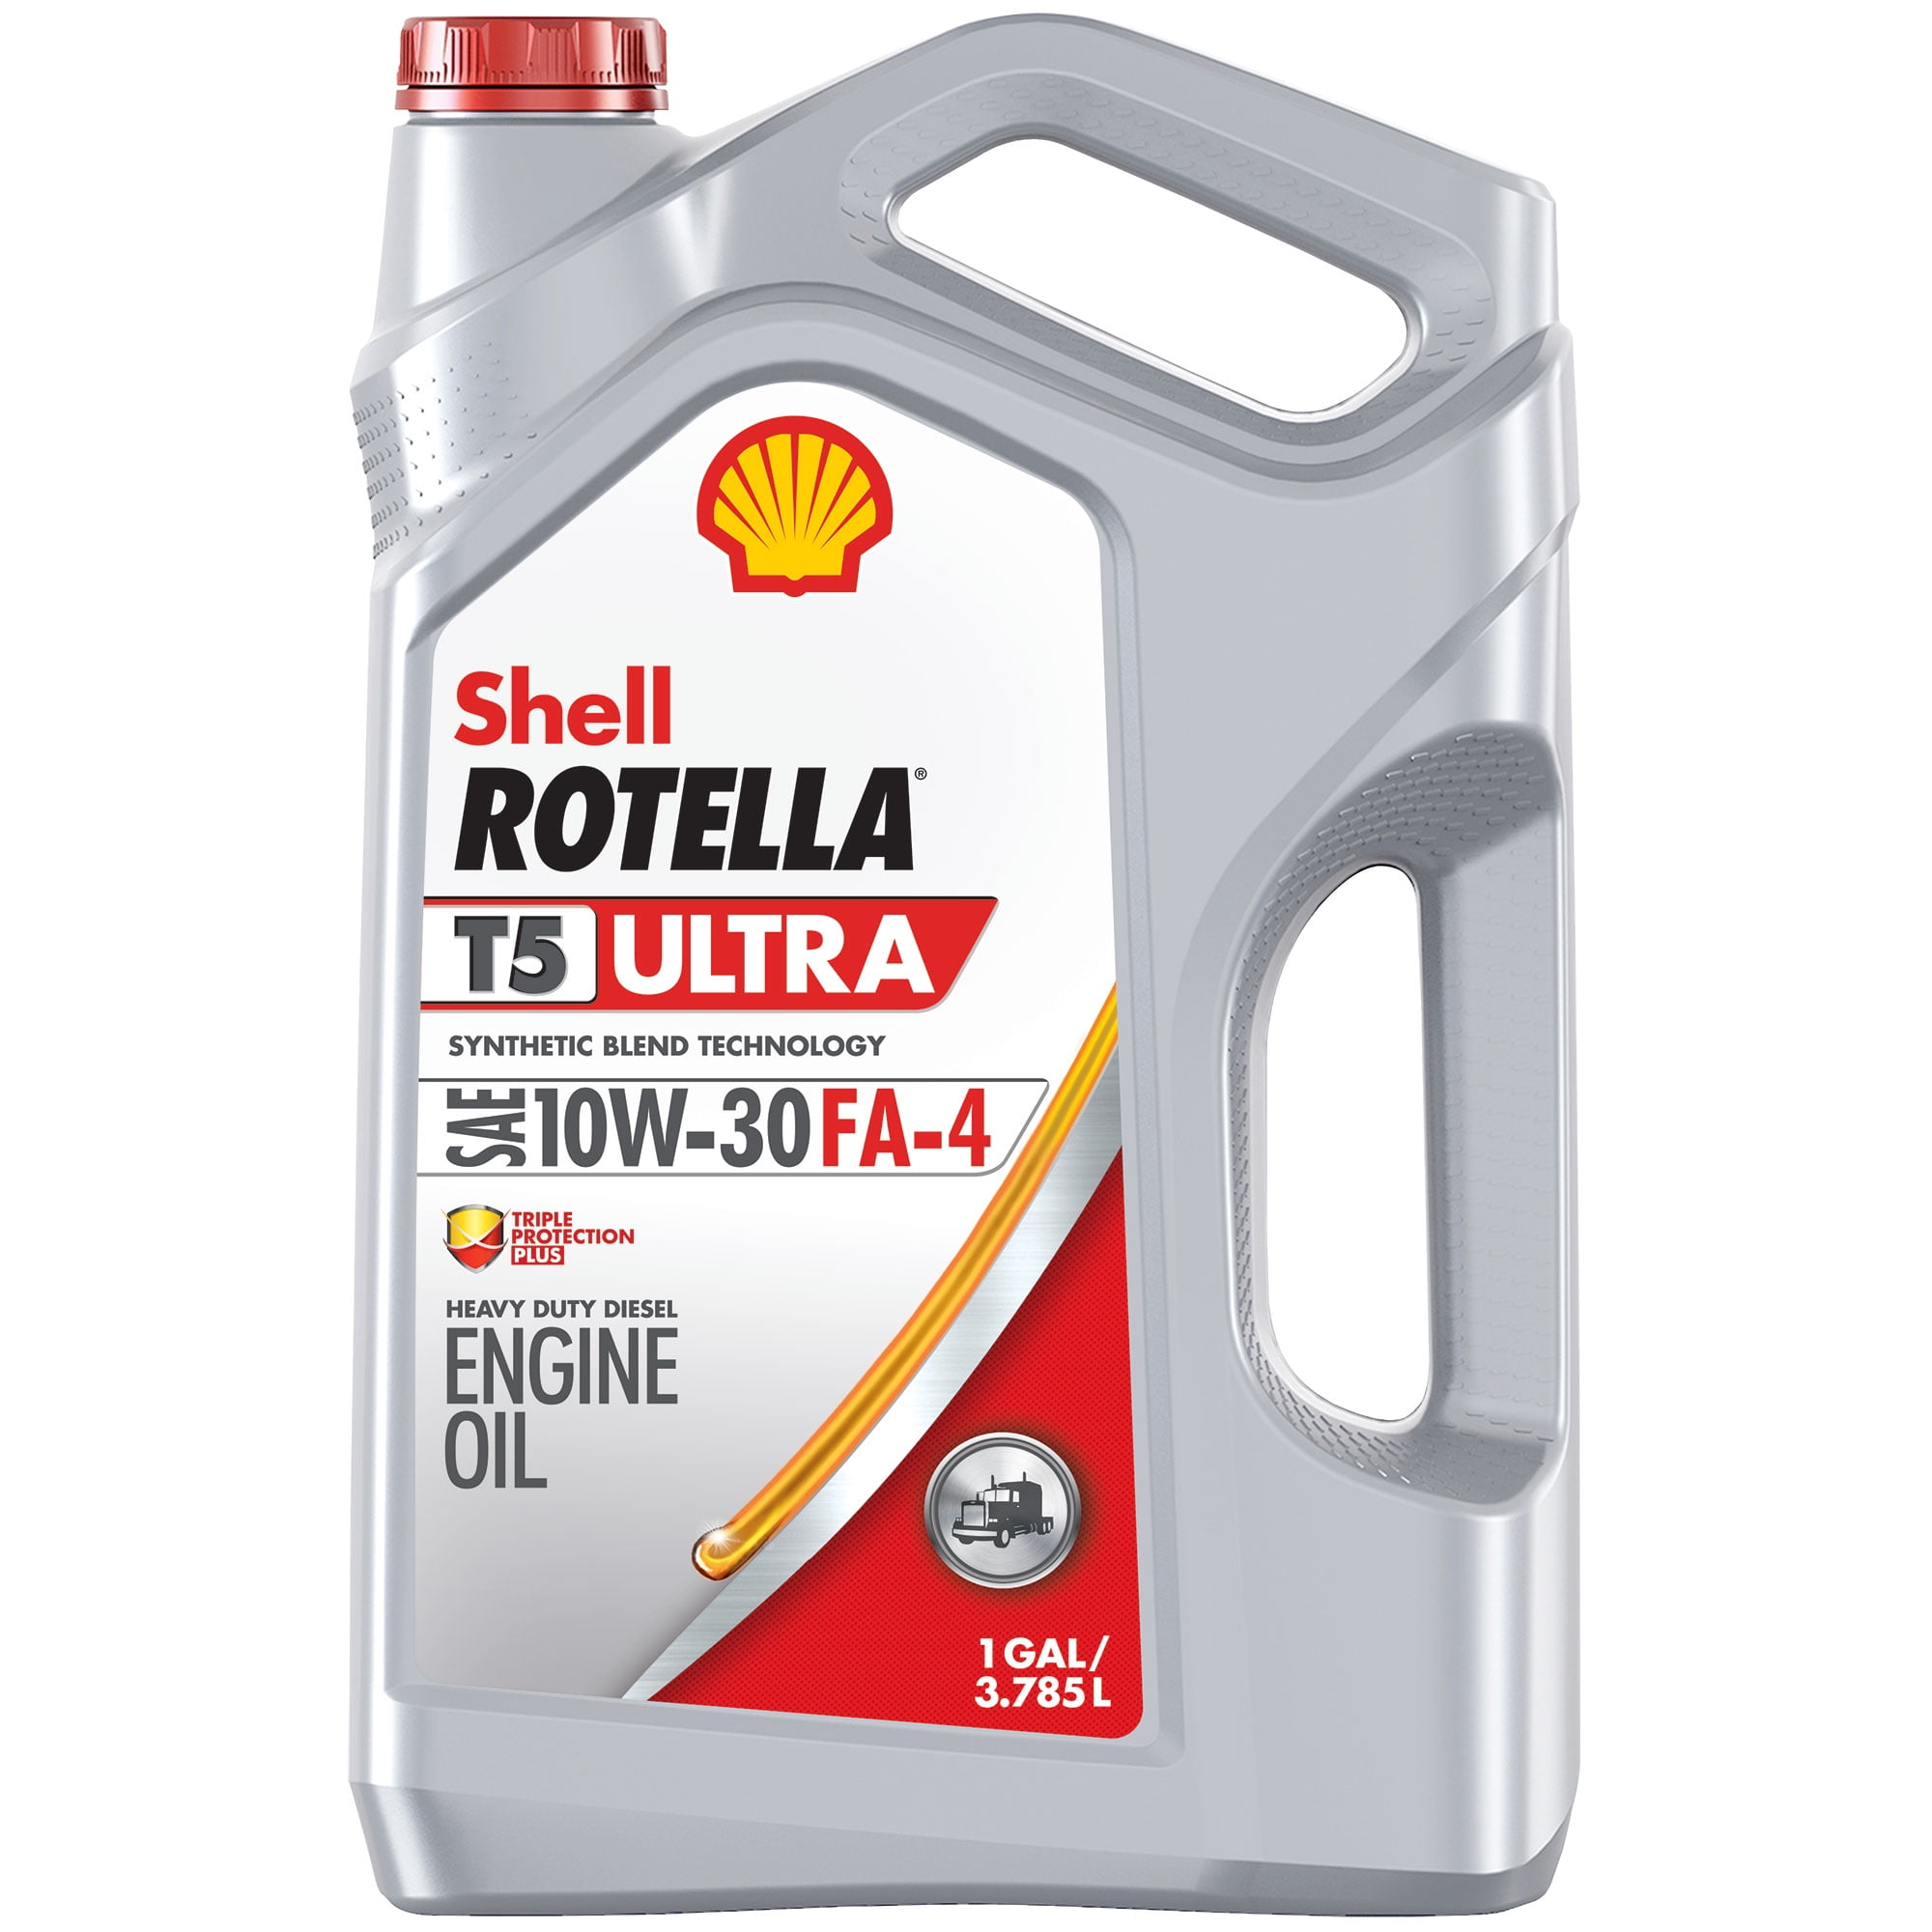 Buy Shell Rotella T5 Ultra Synthetic Blend 10W-30 Diesel Engine Oil, 1 .